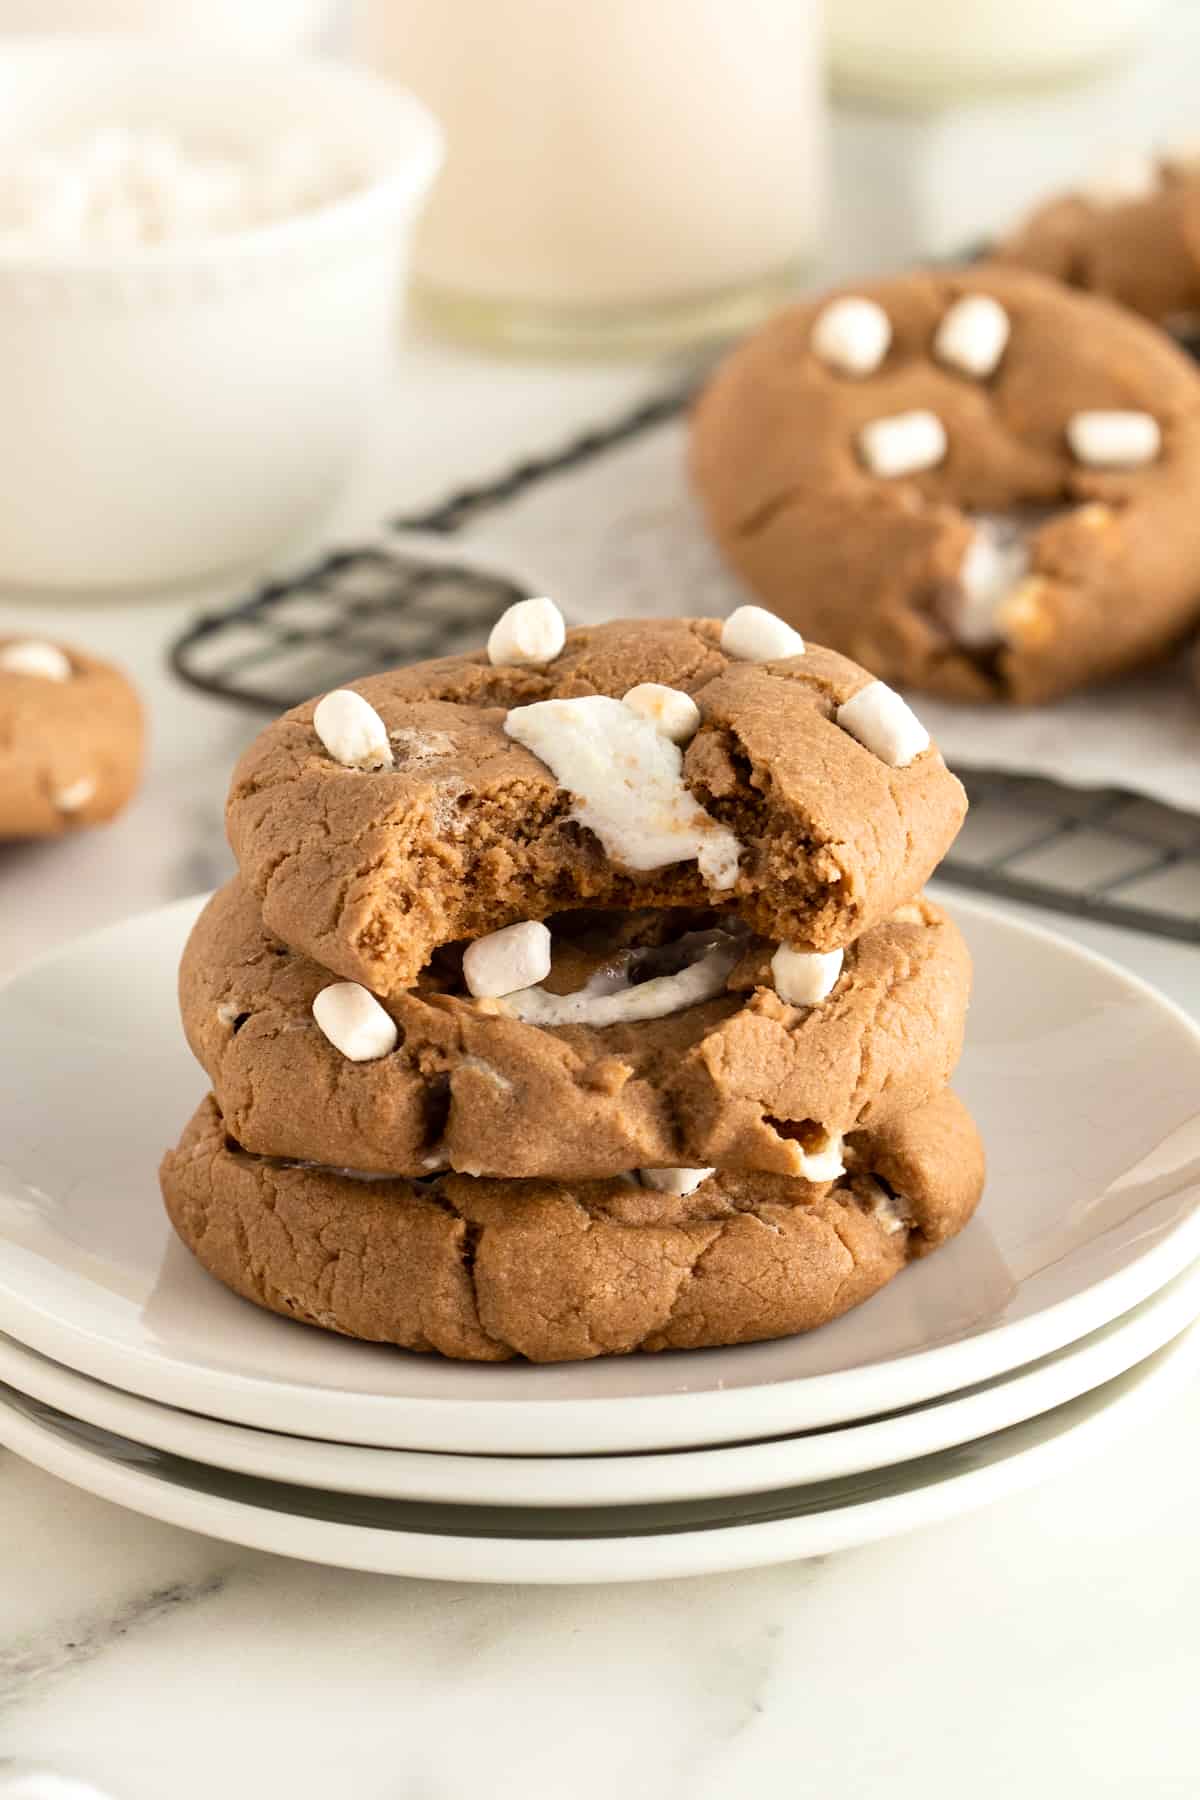 A stack of three hot cocoa cookies on a white plate. The top cookie has a bite out of it revealing melting marshmallow.